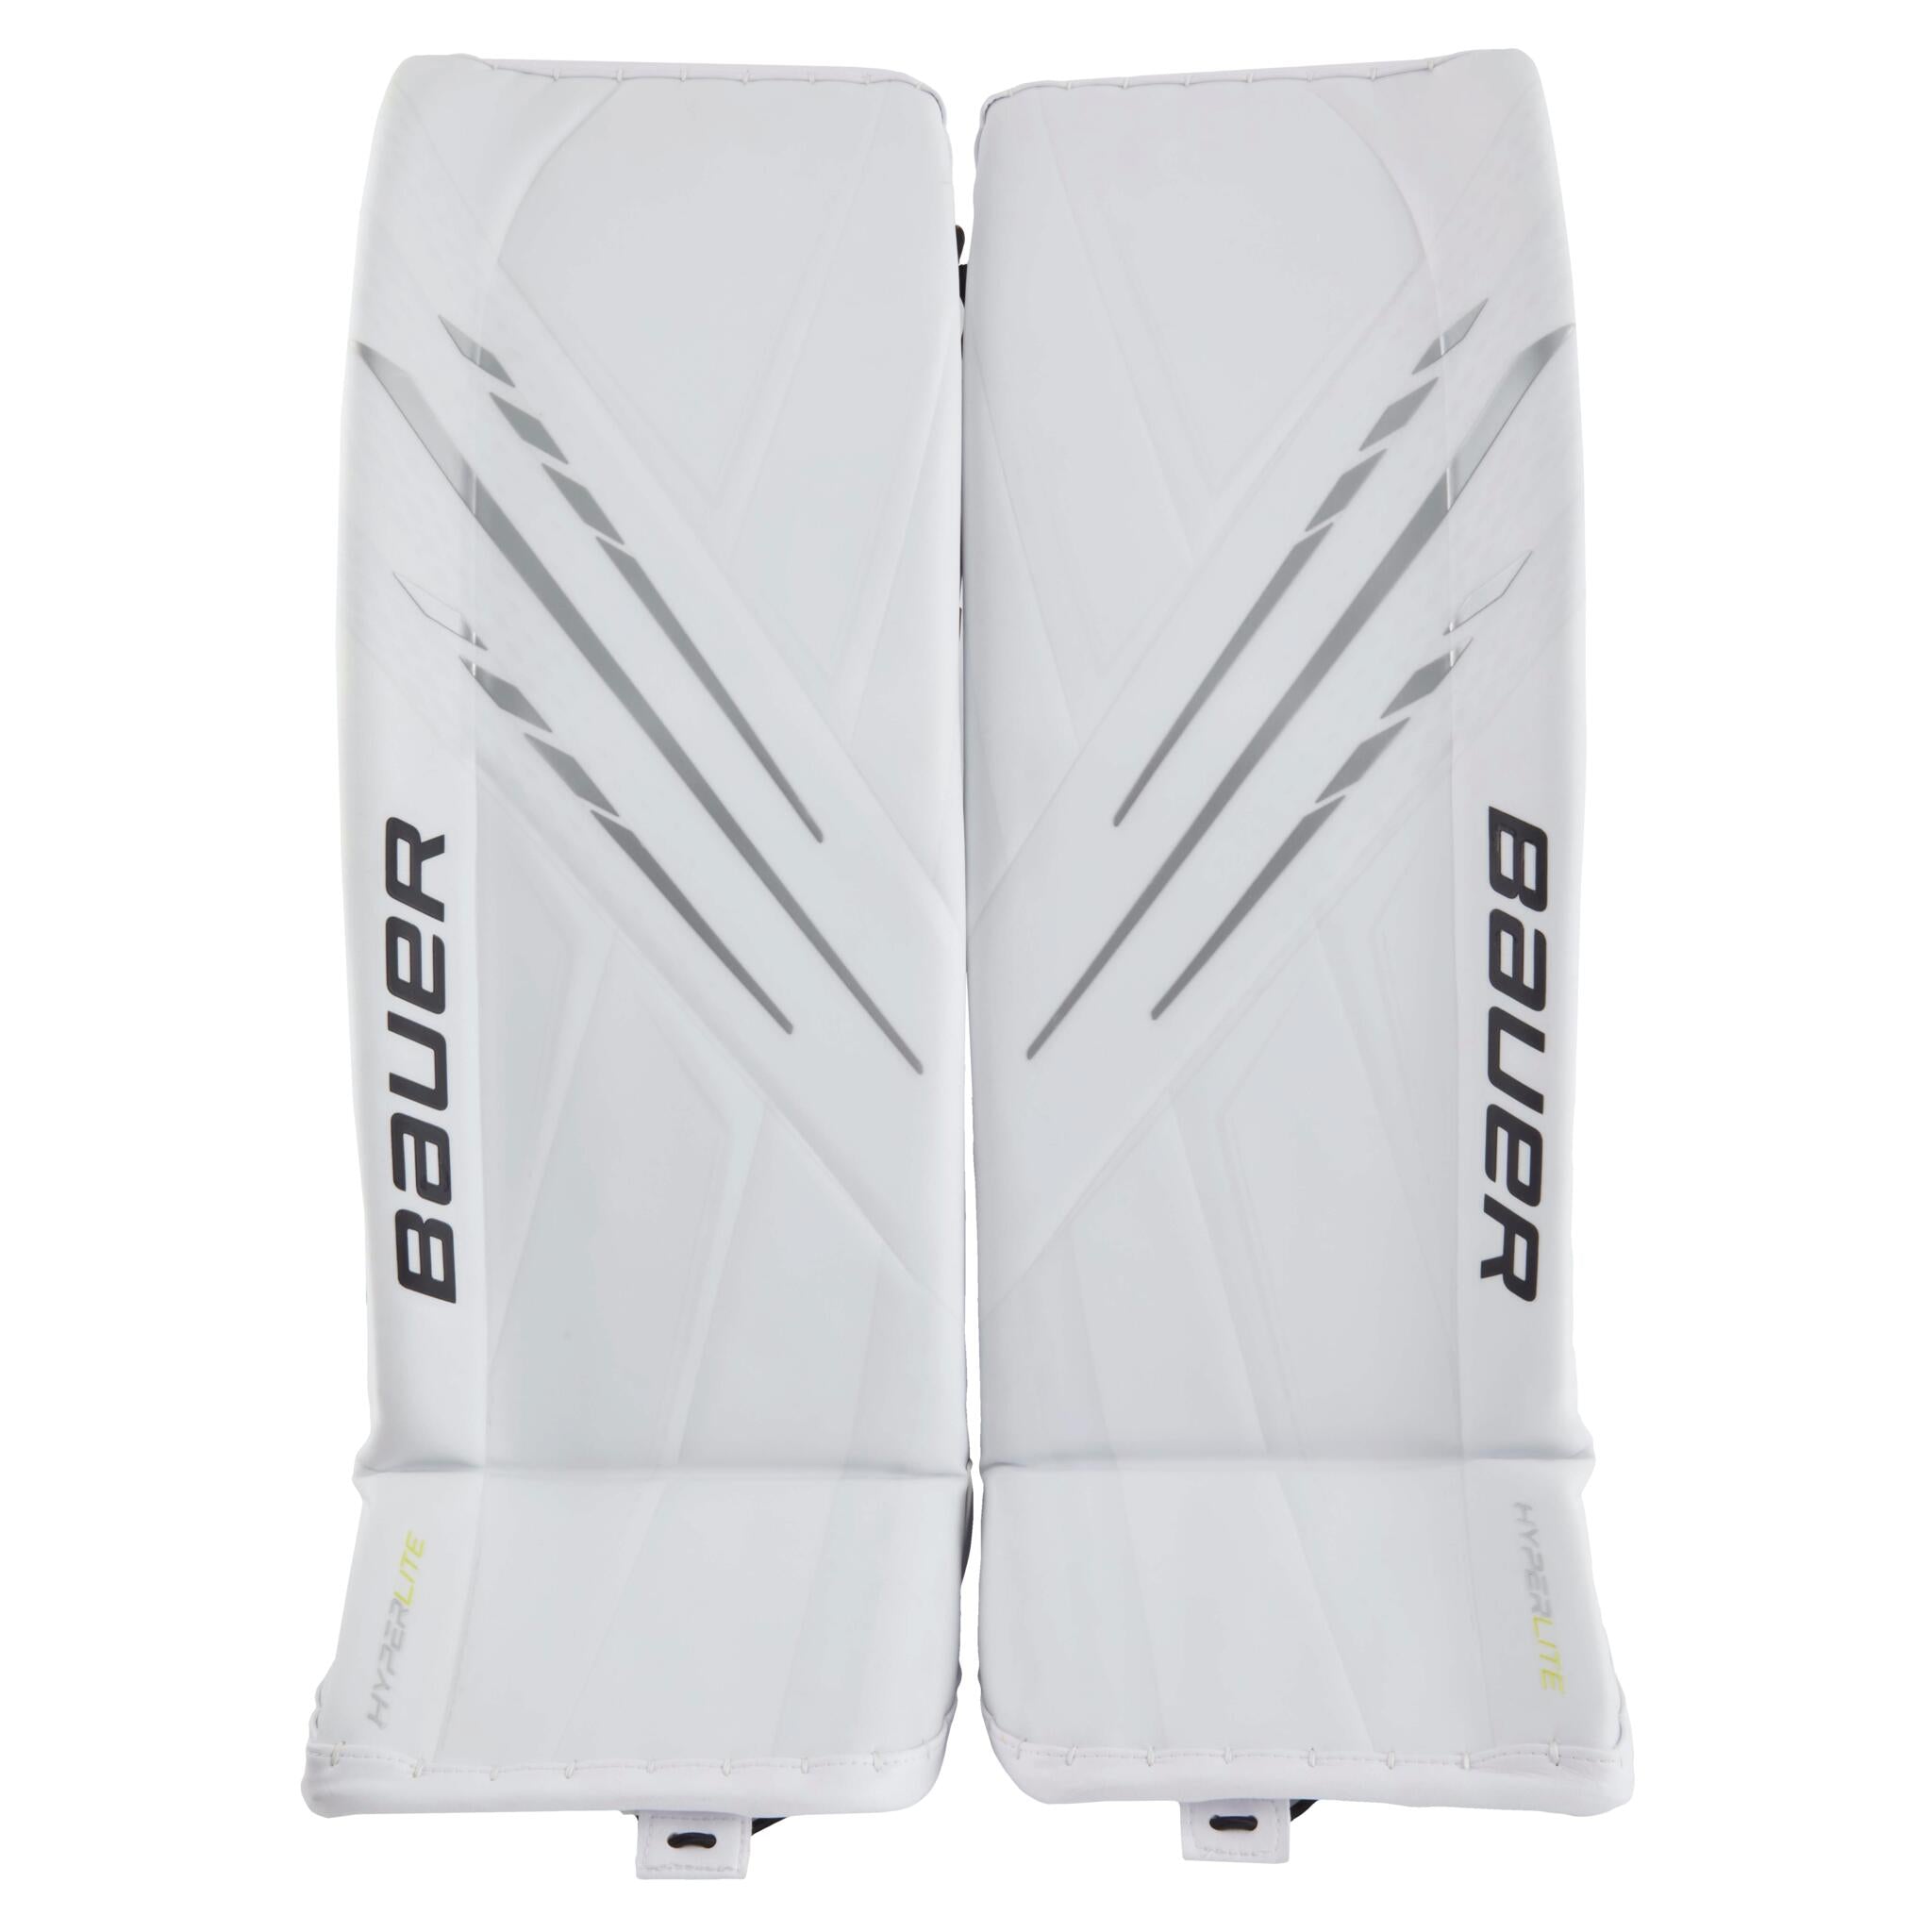 Hockey Goalie Pad Wrap Made in the USA